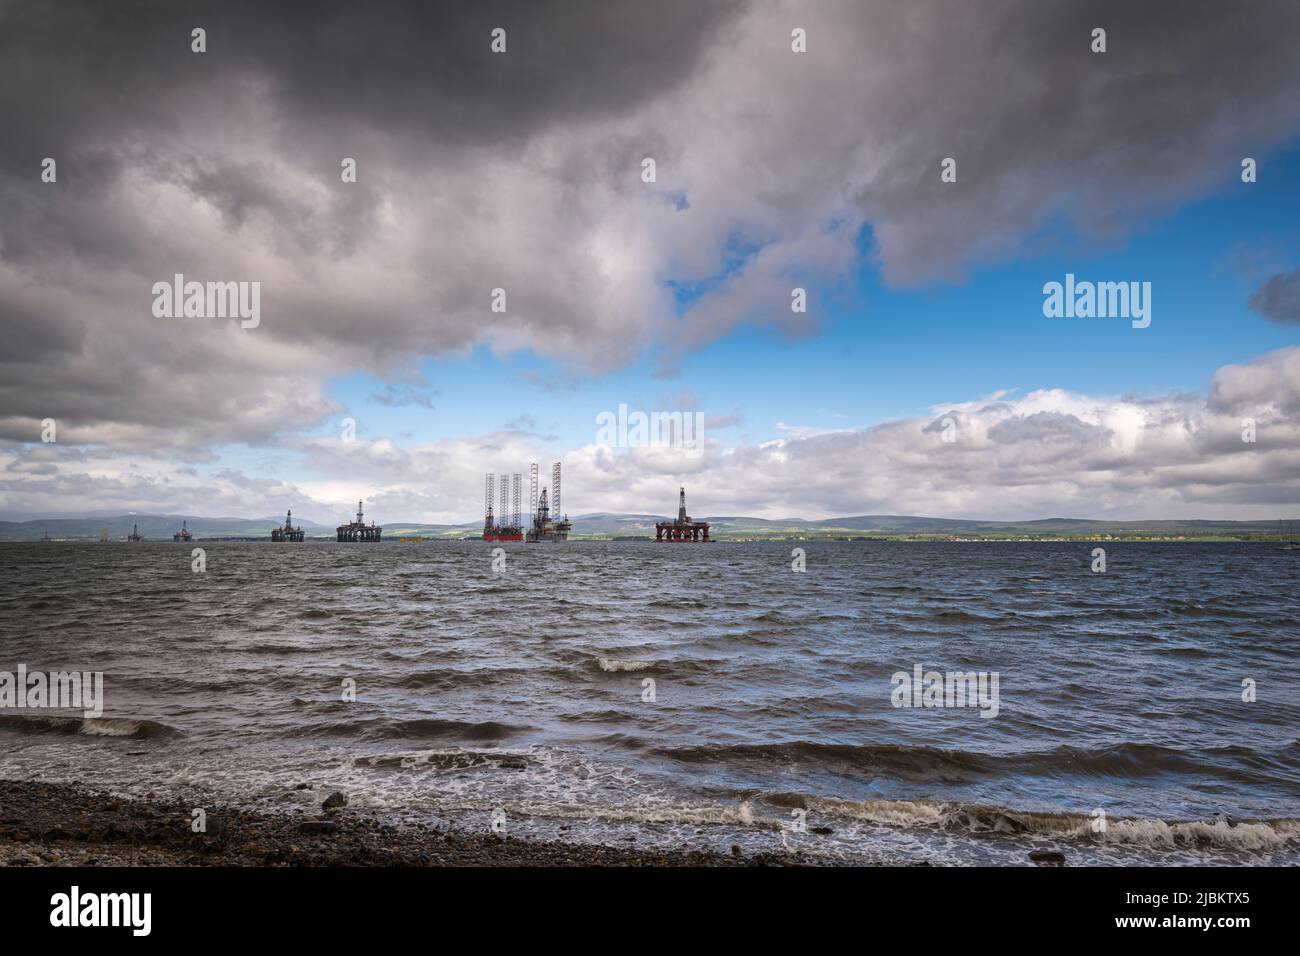 A cloudy, summer HDR image of the Oil rig graveyard in the Cromarty Firth near Invergordon, Scotland. 27 May 2022 Stock Photo